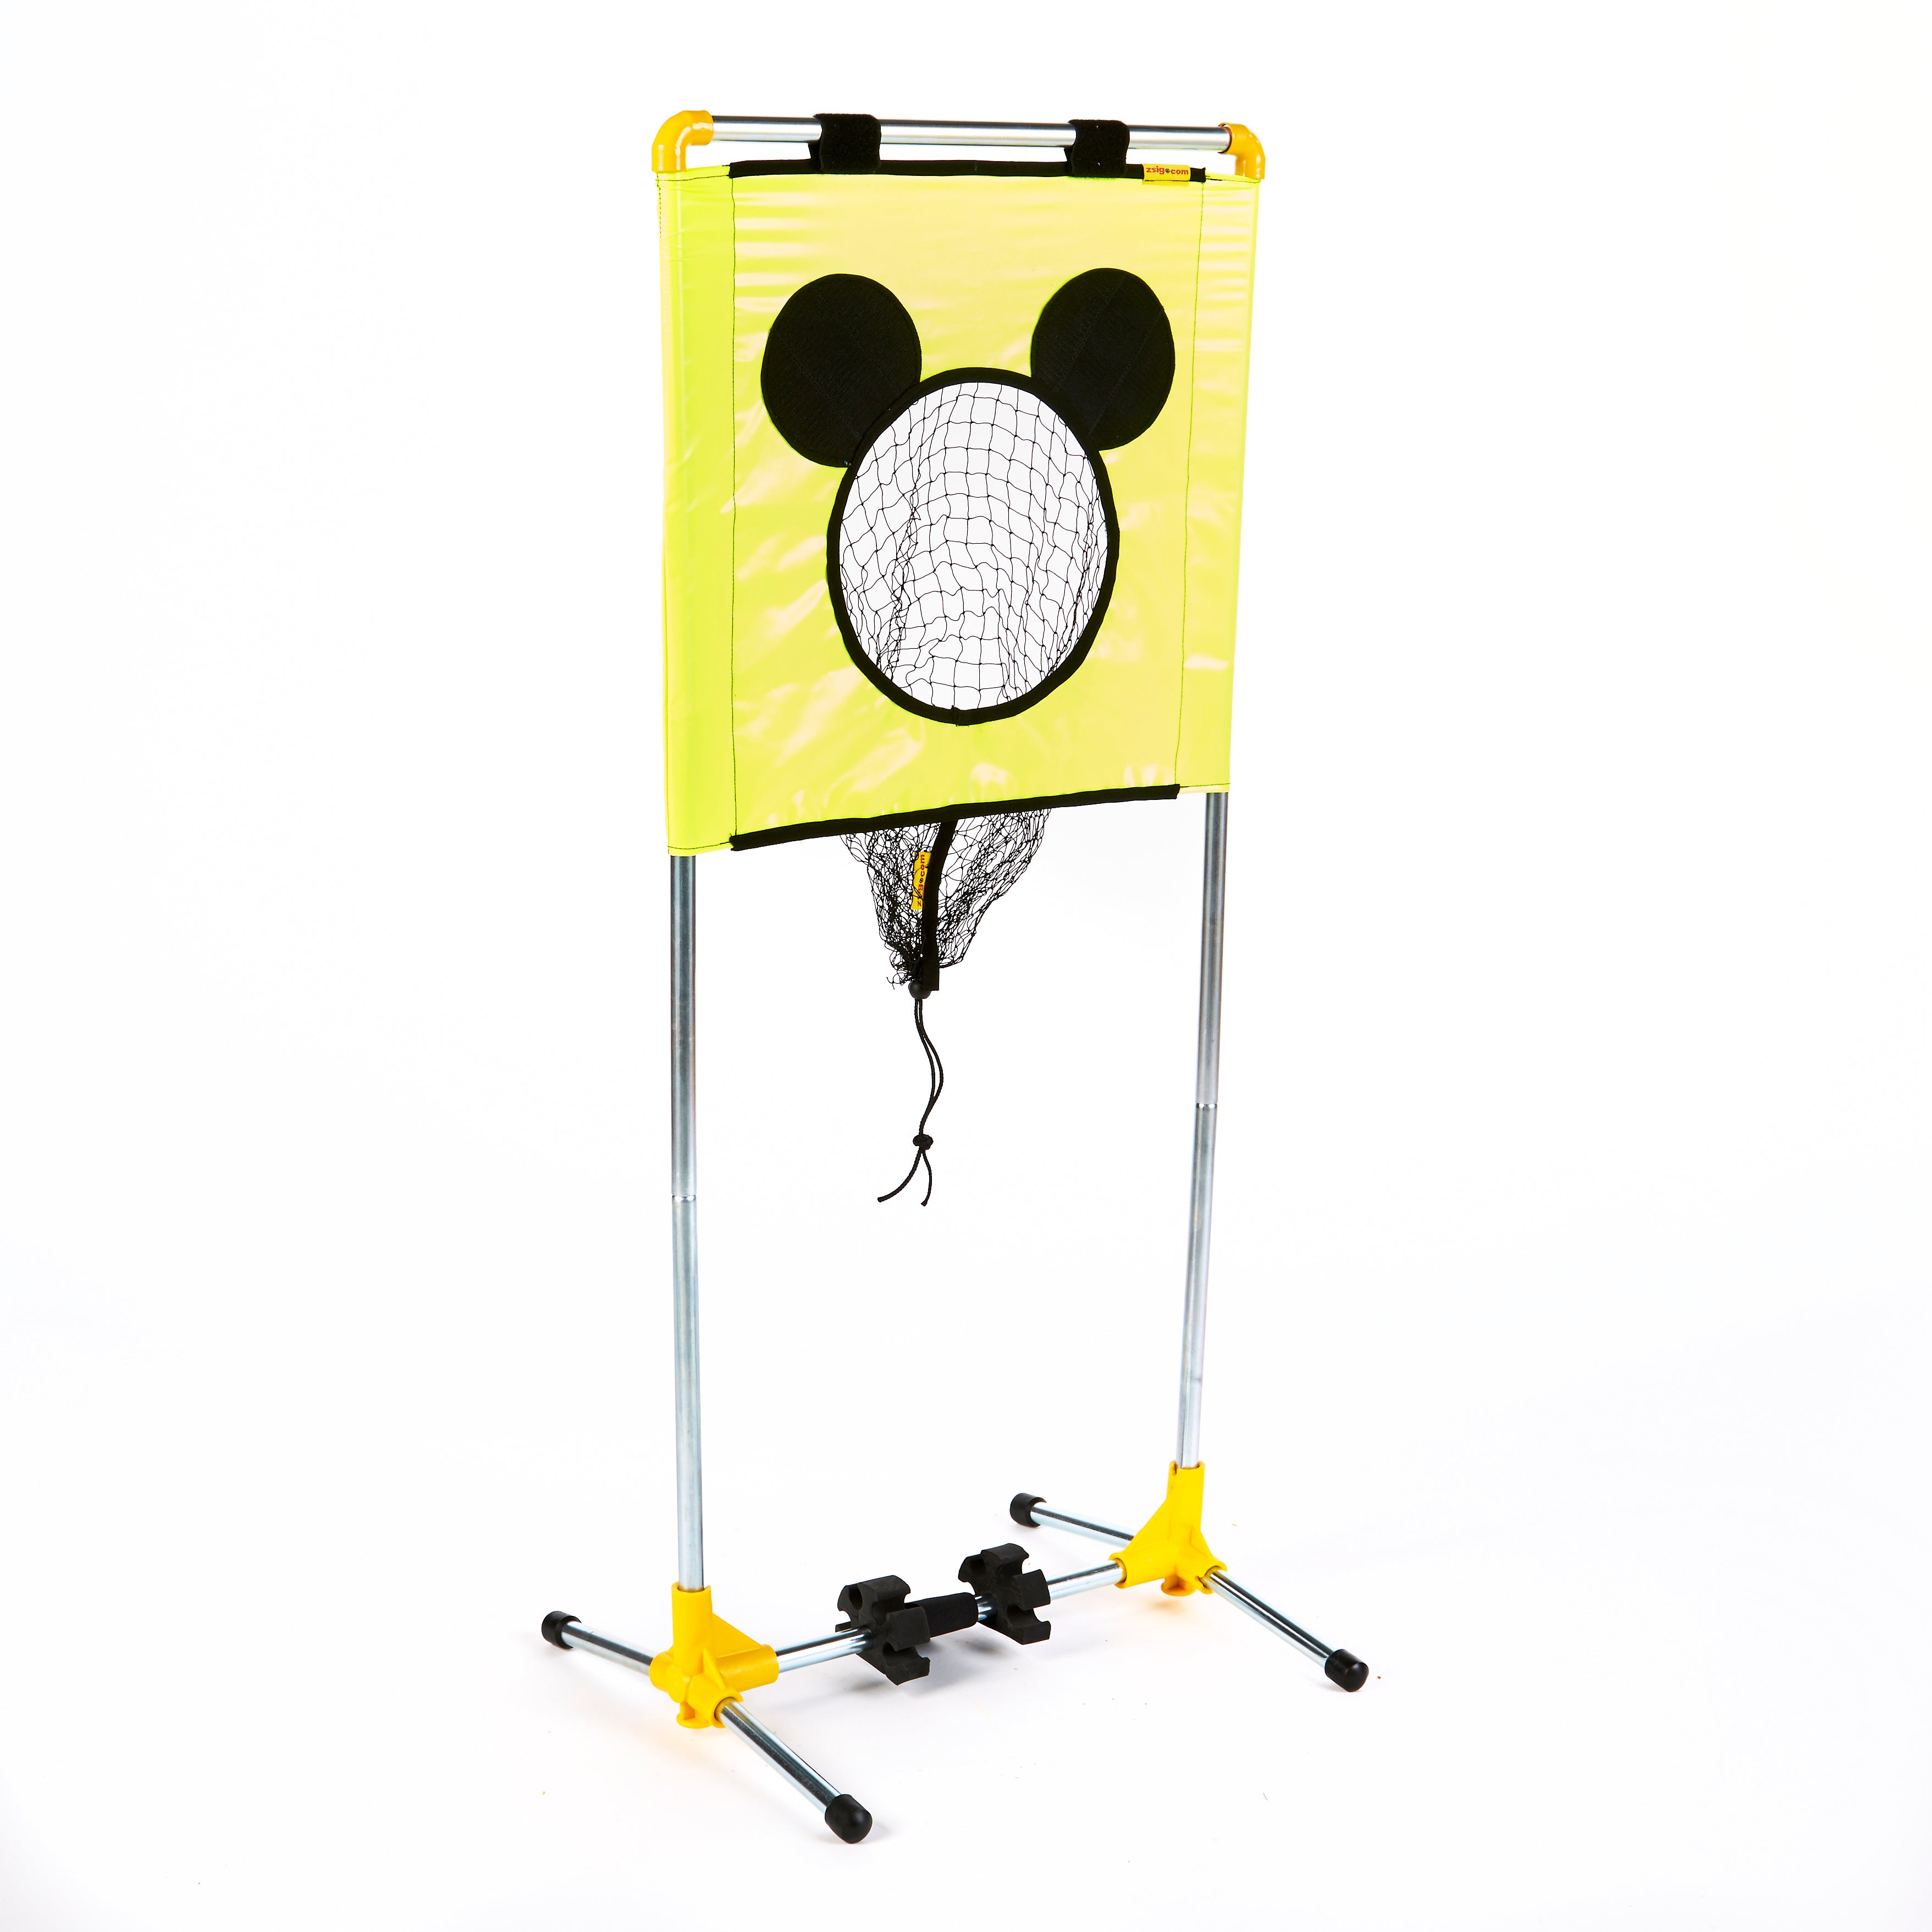 Zsig Mini Mouse portable Target Trainer with target at full height